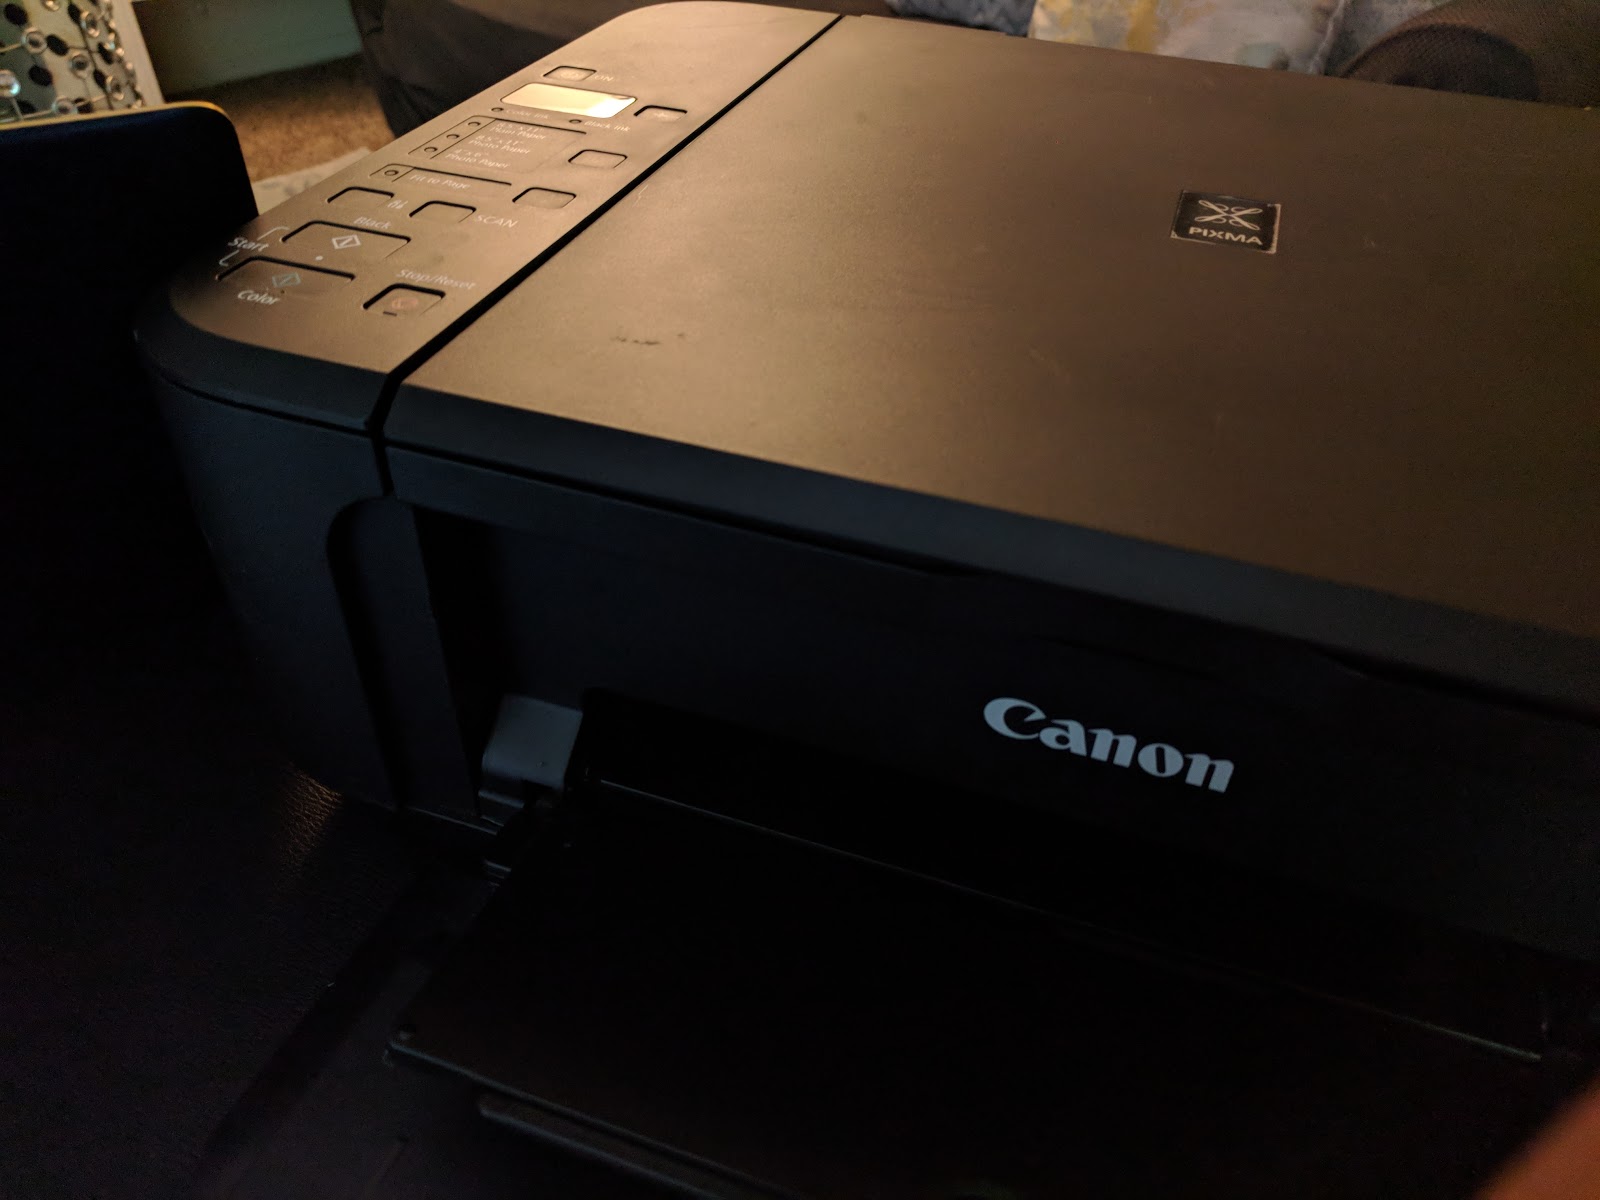 canon ip4500 software download for mac